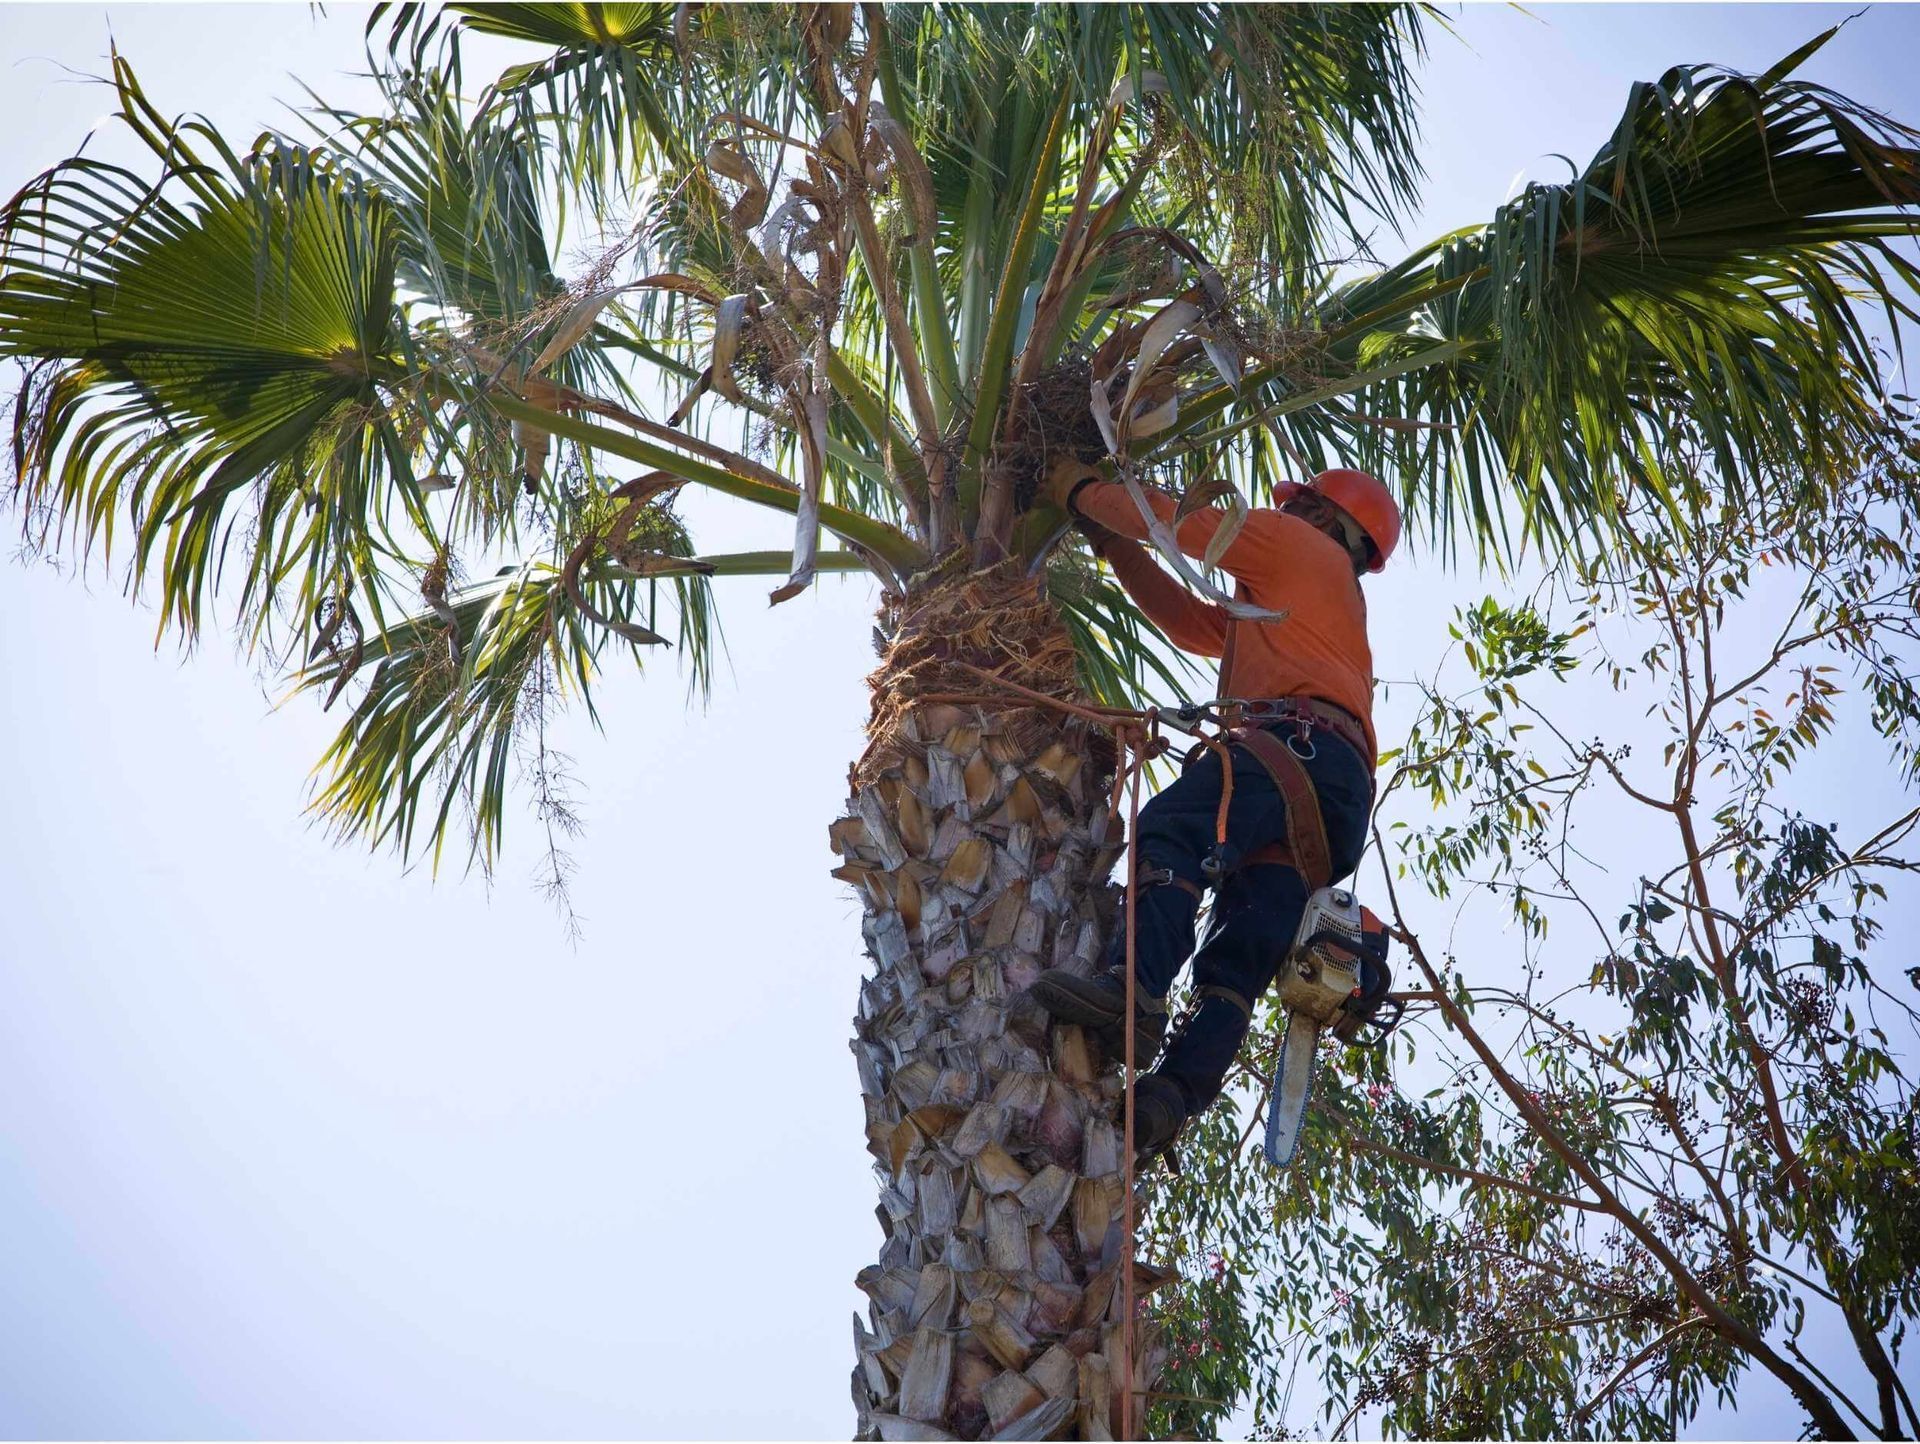 Real Tree Trimming & Landscaping, Inc. arborist performing palm tree trimming in Boynton Beach, FL